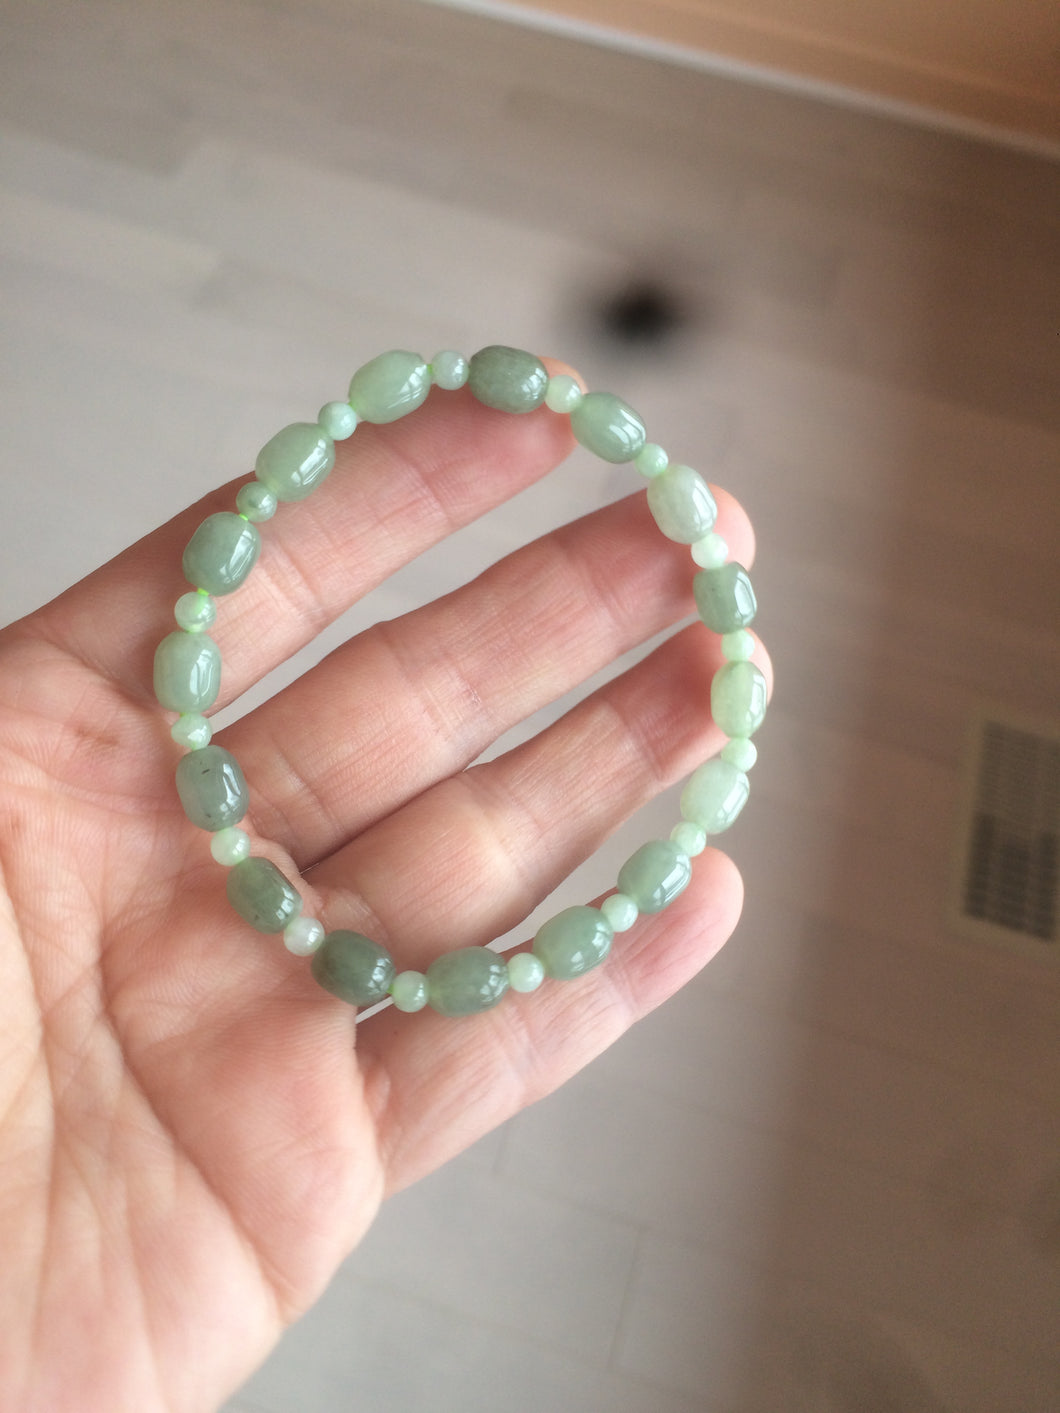 8.2/6.6mm 100% natural type A icy eatery green/dark green olive jadeite jade bead bracelet for size 52-56 hand D74